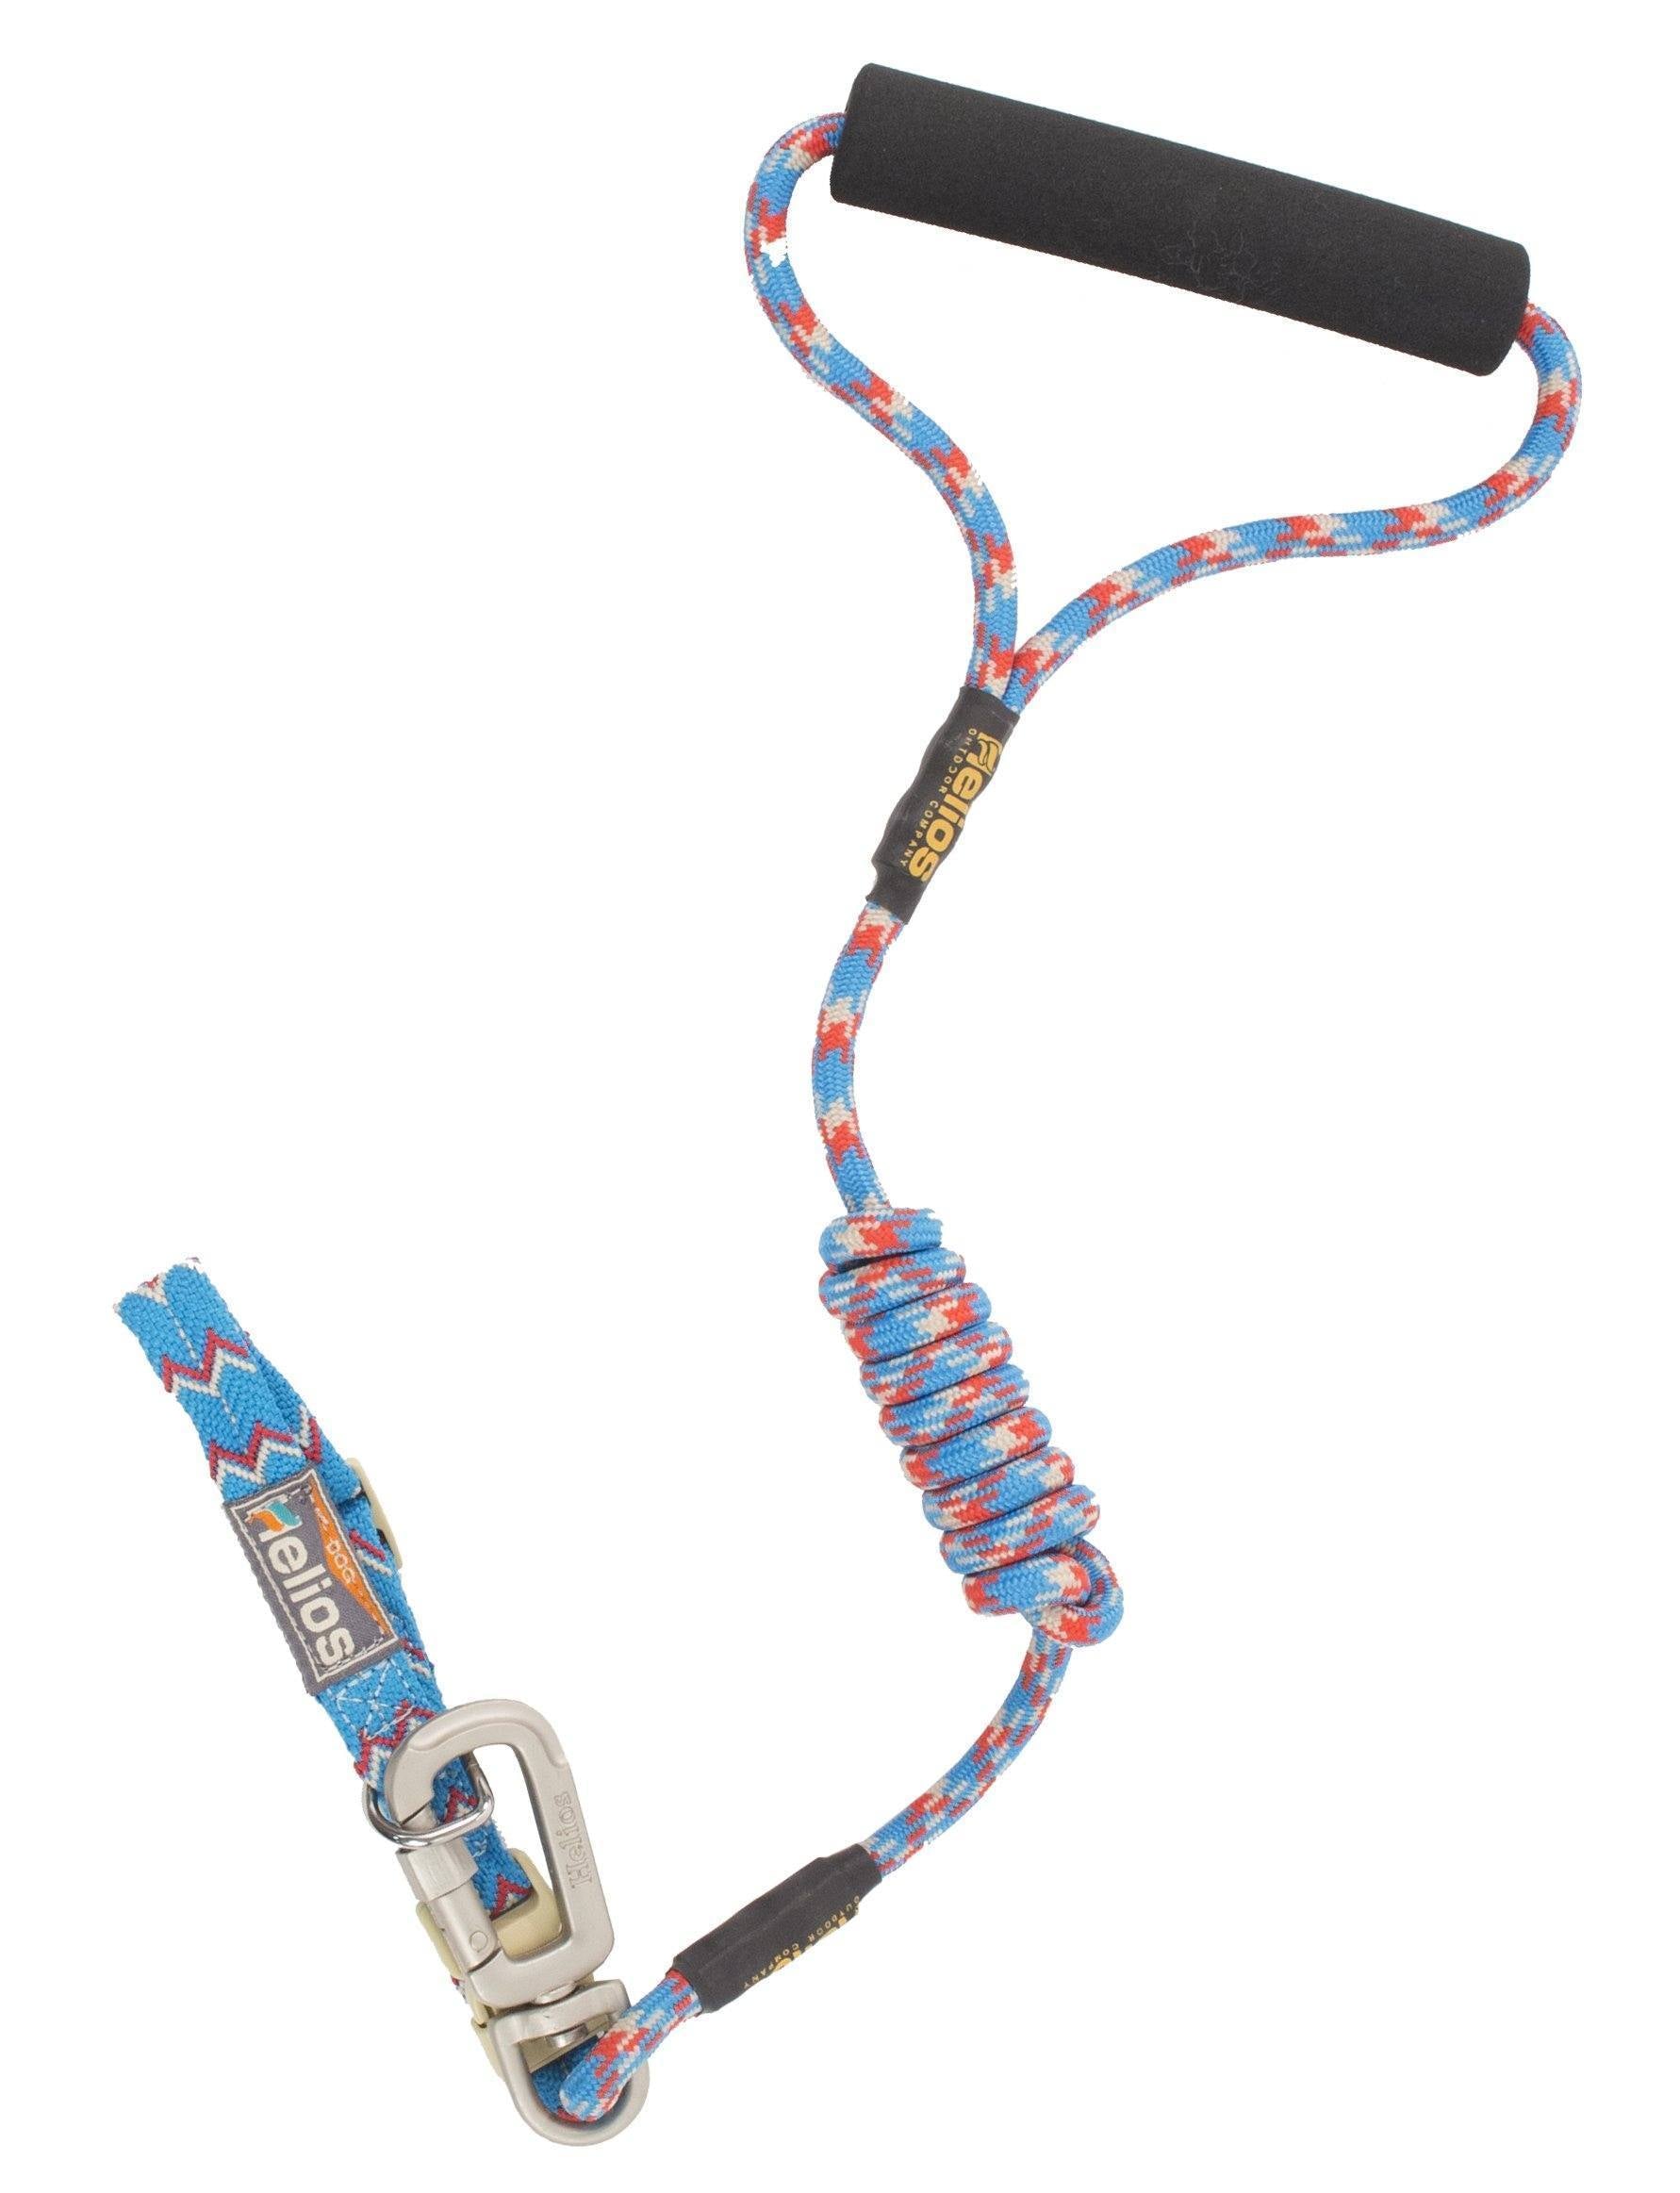 Dog Helios ® 'Dura-Tough' 2-in-1 Reflective Adjustable Fashion Dog Leash and Collar Small Blue